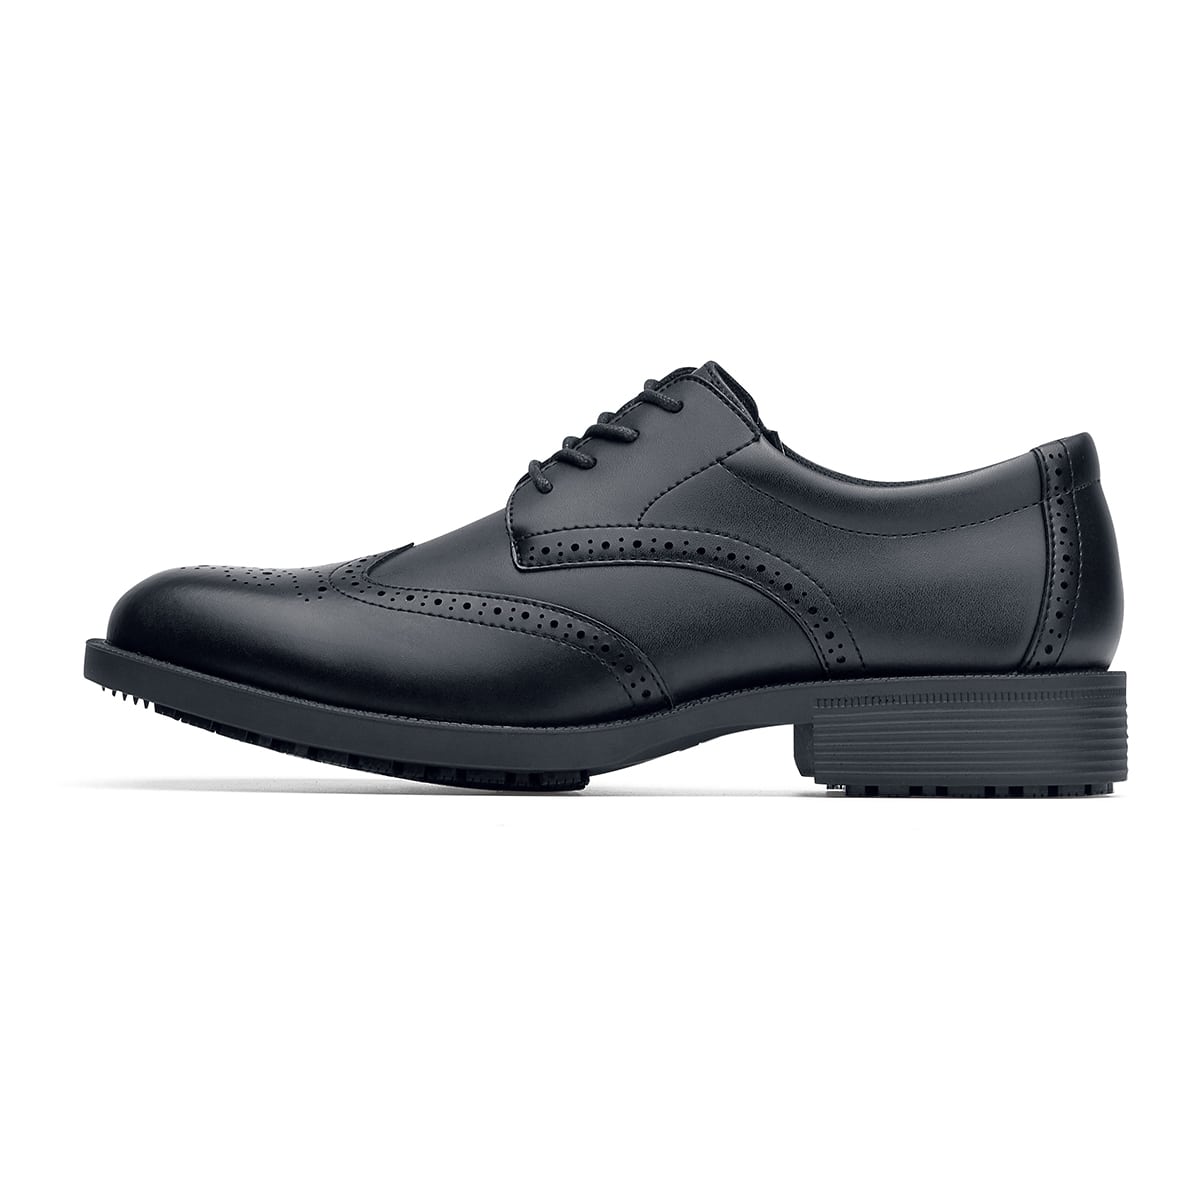 The Executive Wing Tip IV from Shoes For Crews, is an slip resistant dress shoe with a water resistant breathable leather upper to provide industry leading levels of grip and durability, seen from the left.